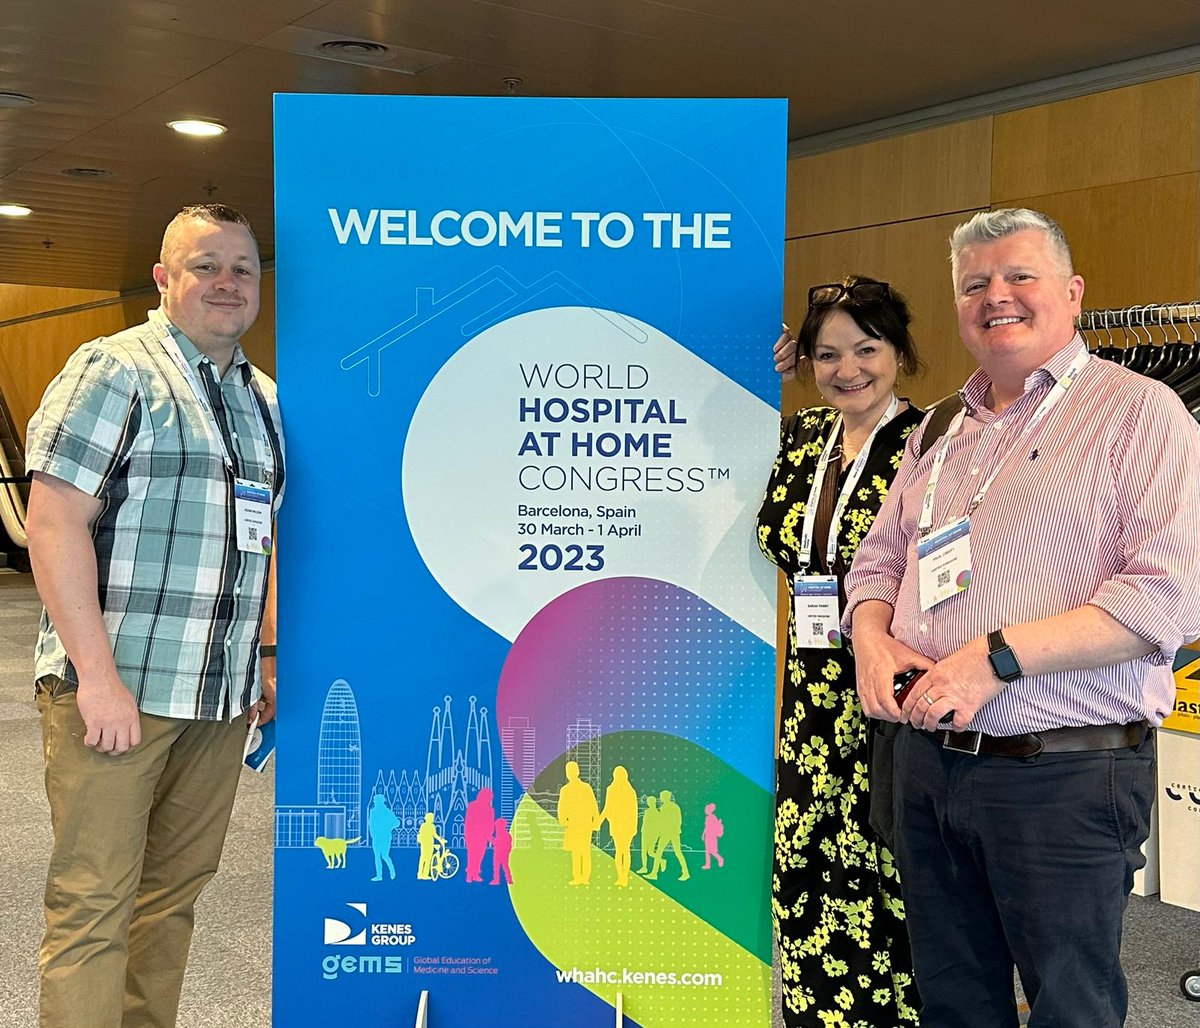 The Digital Hub recently sponsored three people to attend the World Hospital at Home Congress in Barcelona. This amazing opportunity explored how different countries are using technology to advance healthcare services and shared best practice bit.ly/3oLCMD1